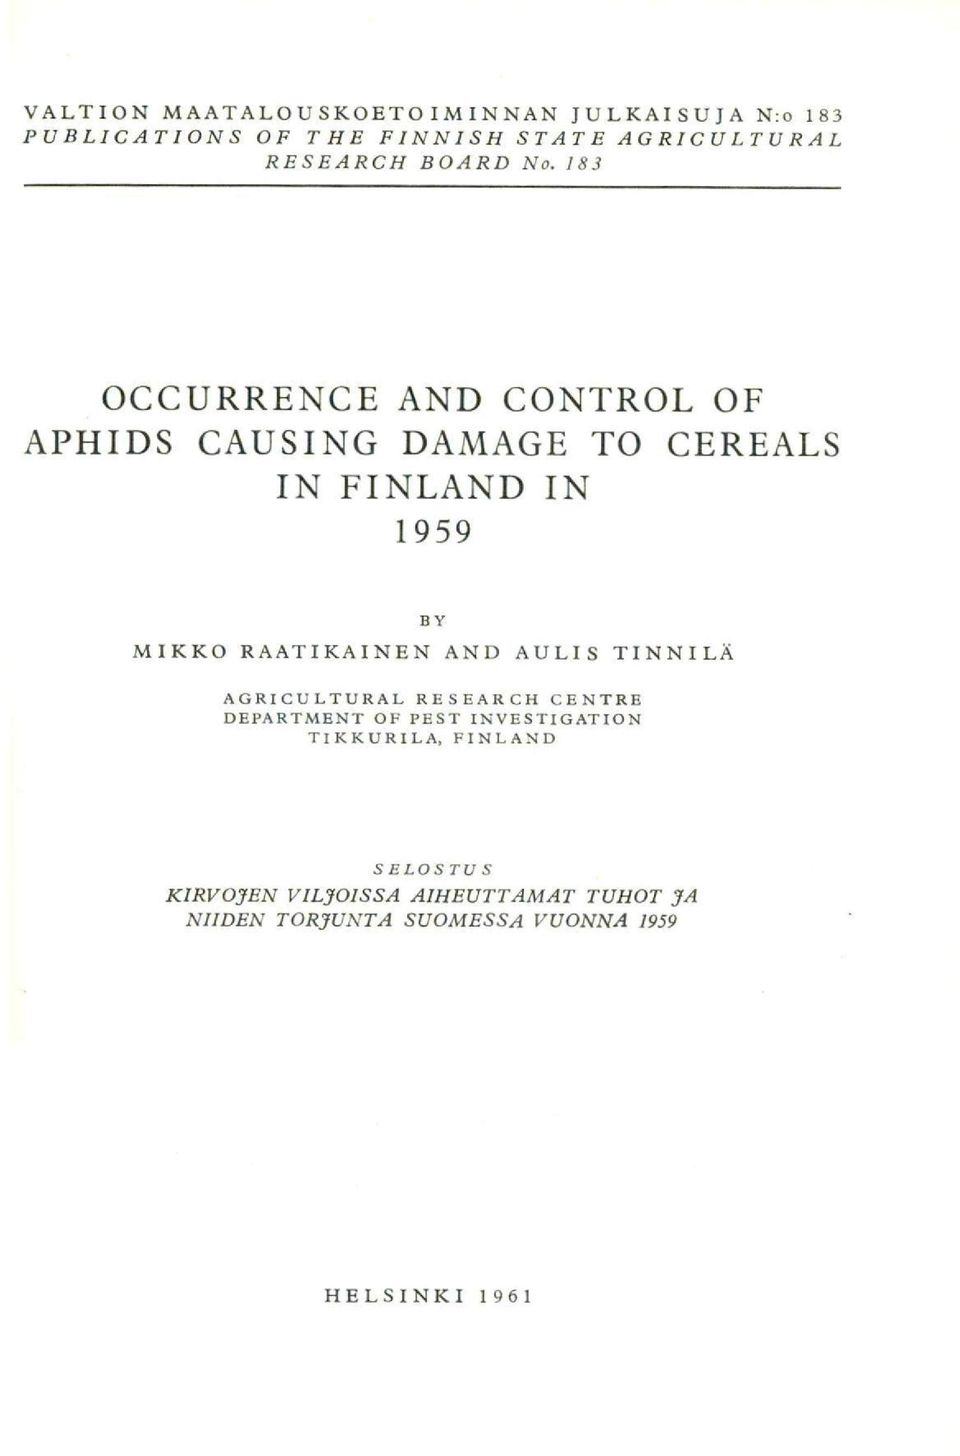 183 OCCURRENCE AND CONTROL OF APHIDS CAUSING DAMAGE TO CEREALS IN FINLAND IN 1959 BY MIKKO RAATIKAINEN